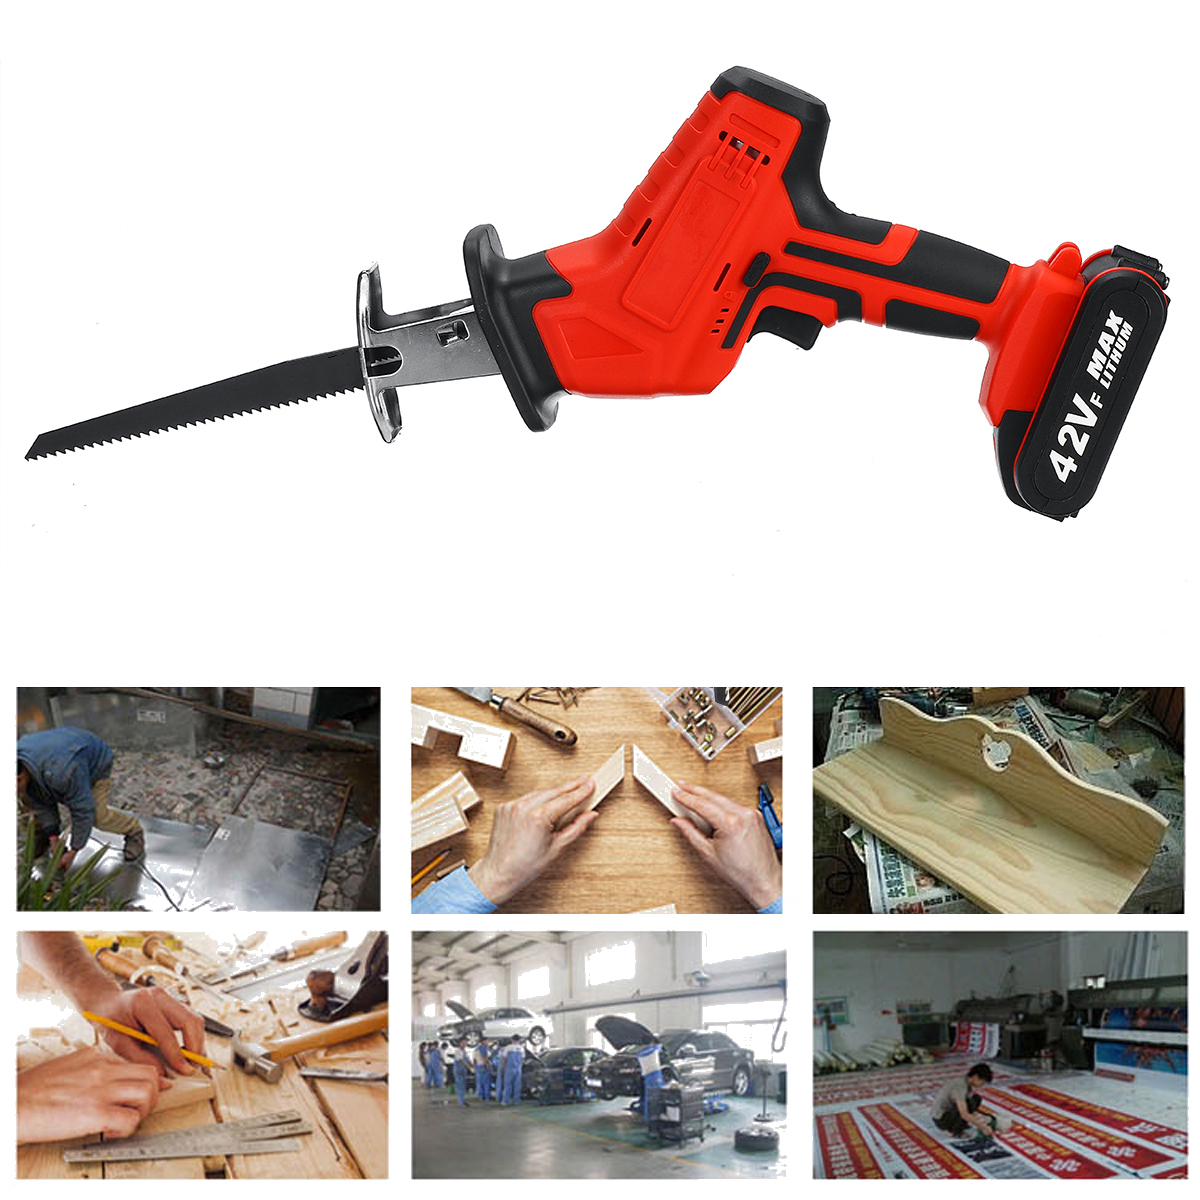 42VF-13000mAh-Cordless-Reciprocating-Saw-Electric-Saws-Portable-Woodworking-Power-Tools-1640981-3